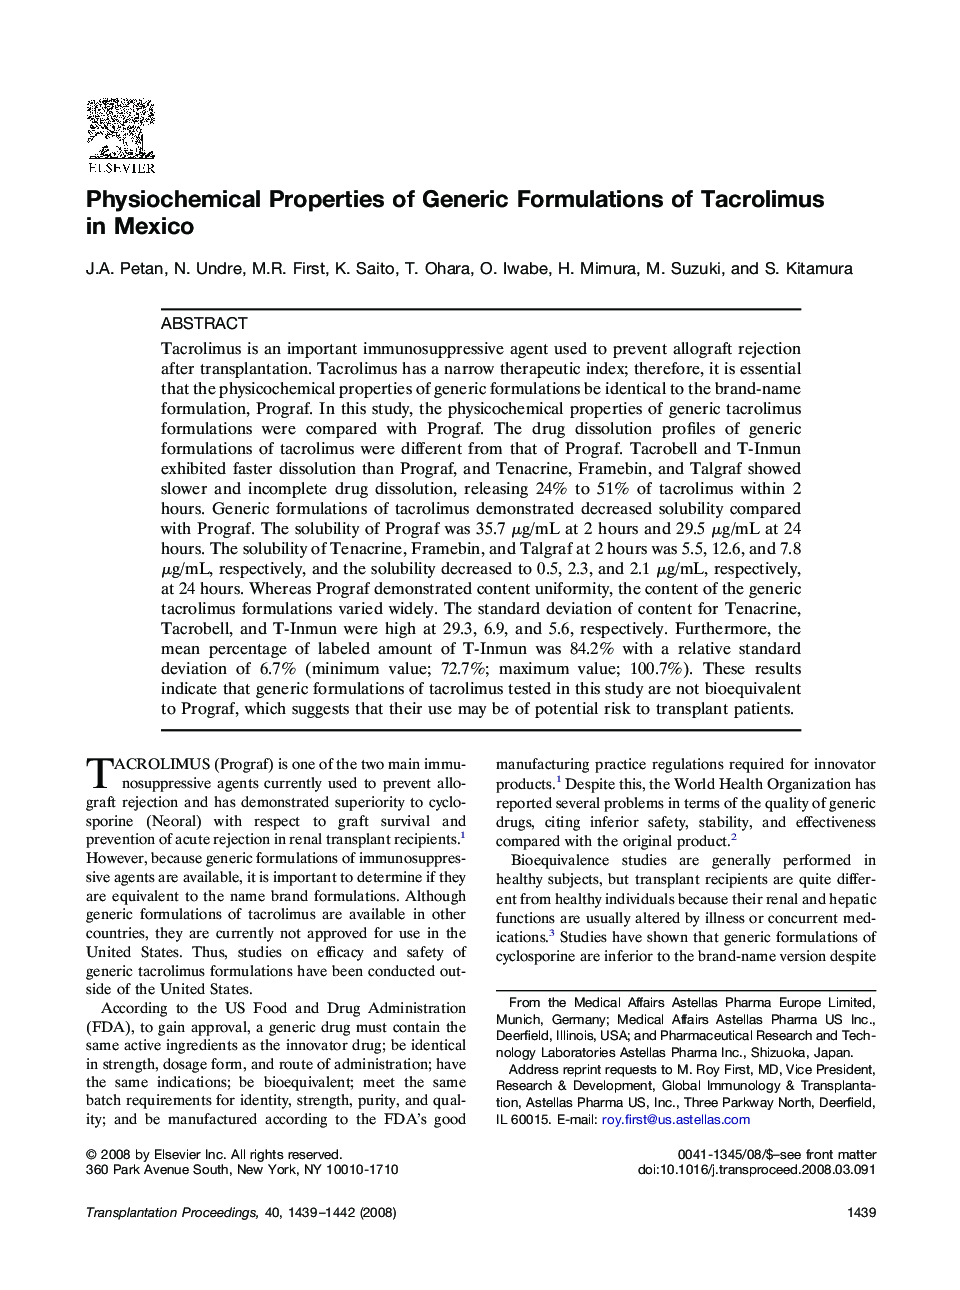 Physiochemical Properties of Generic Formulations of Tacrolimus in Mexico